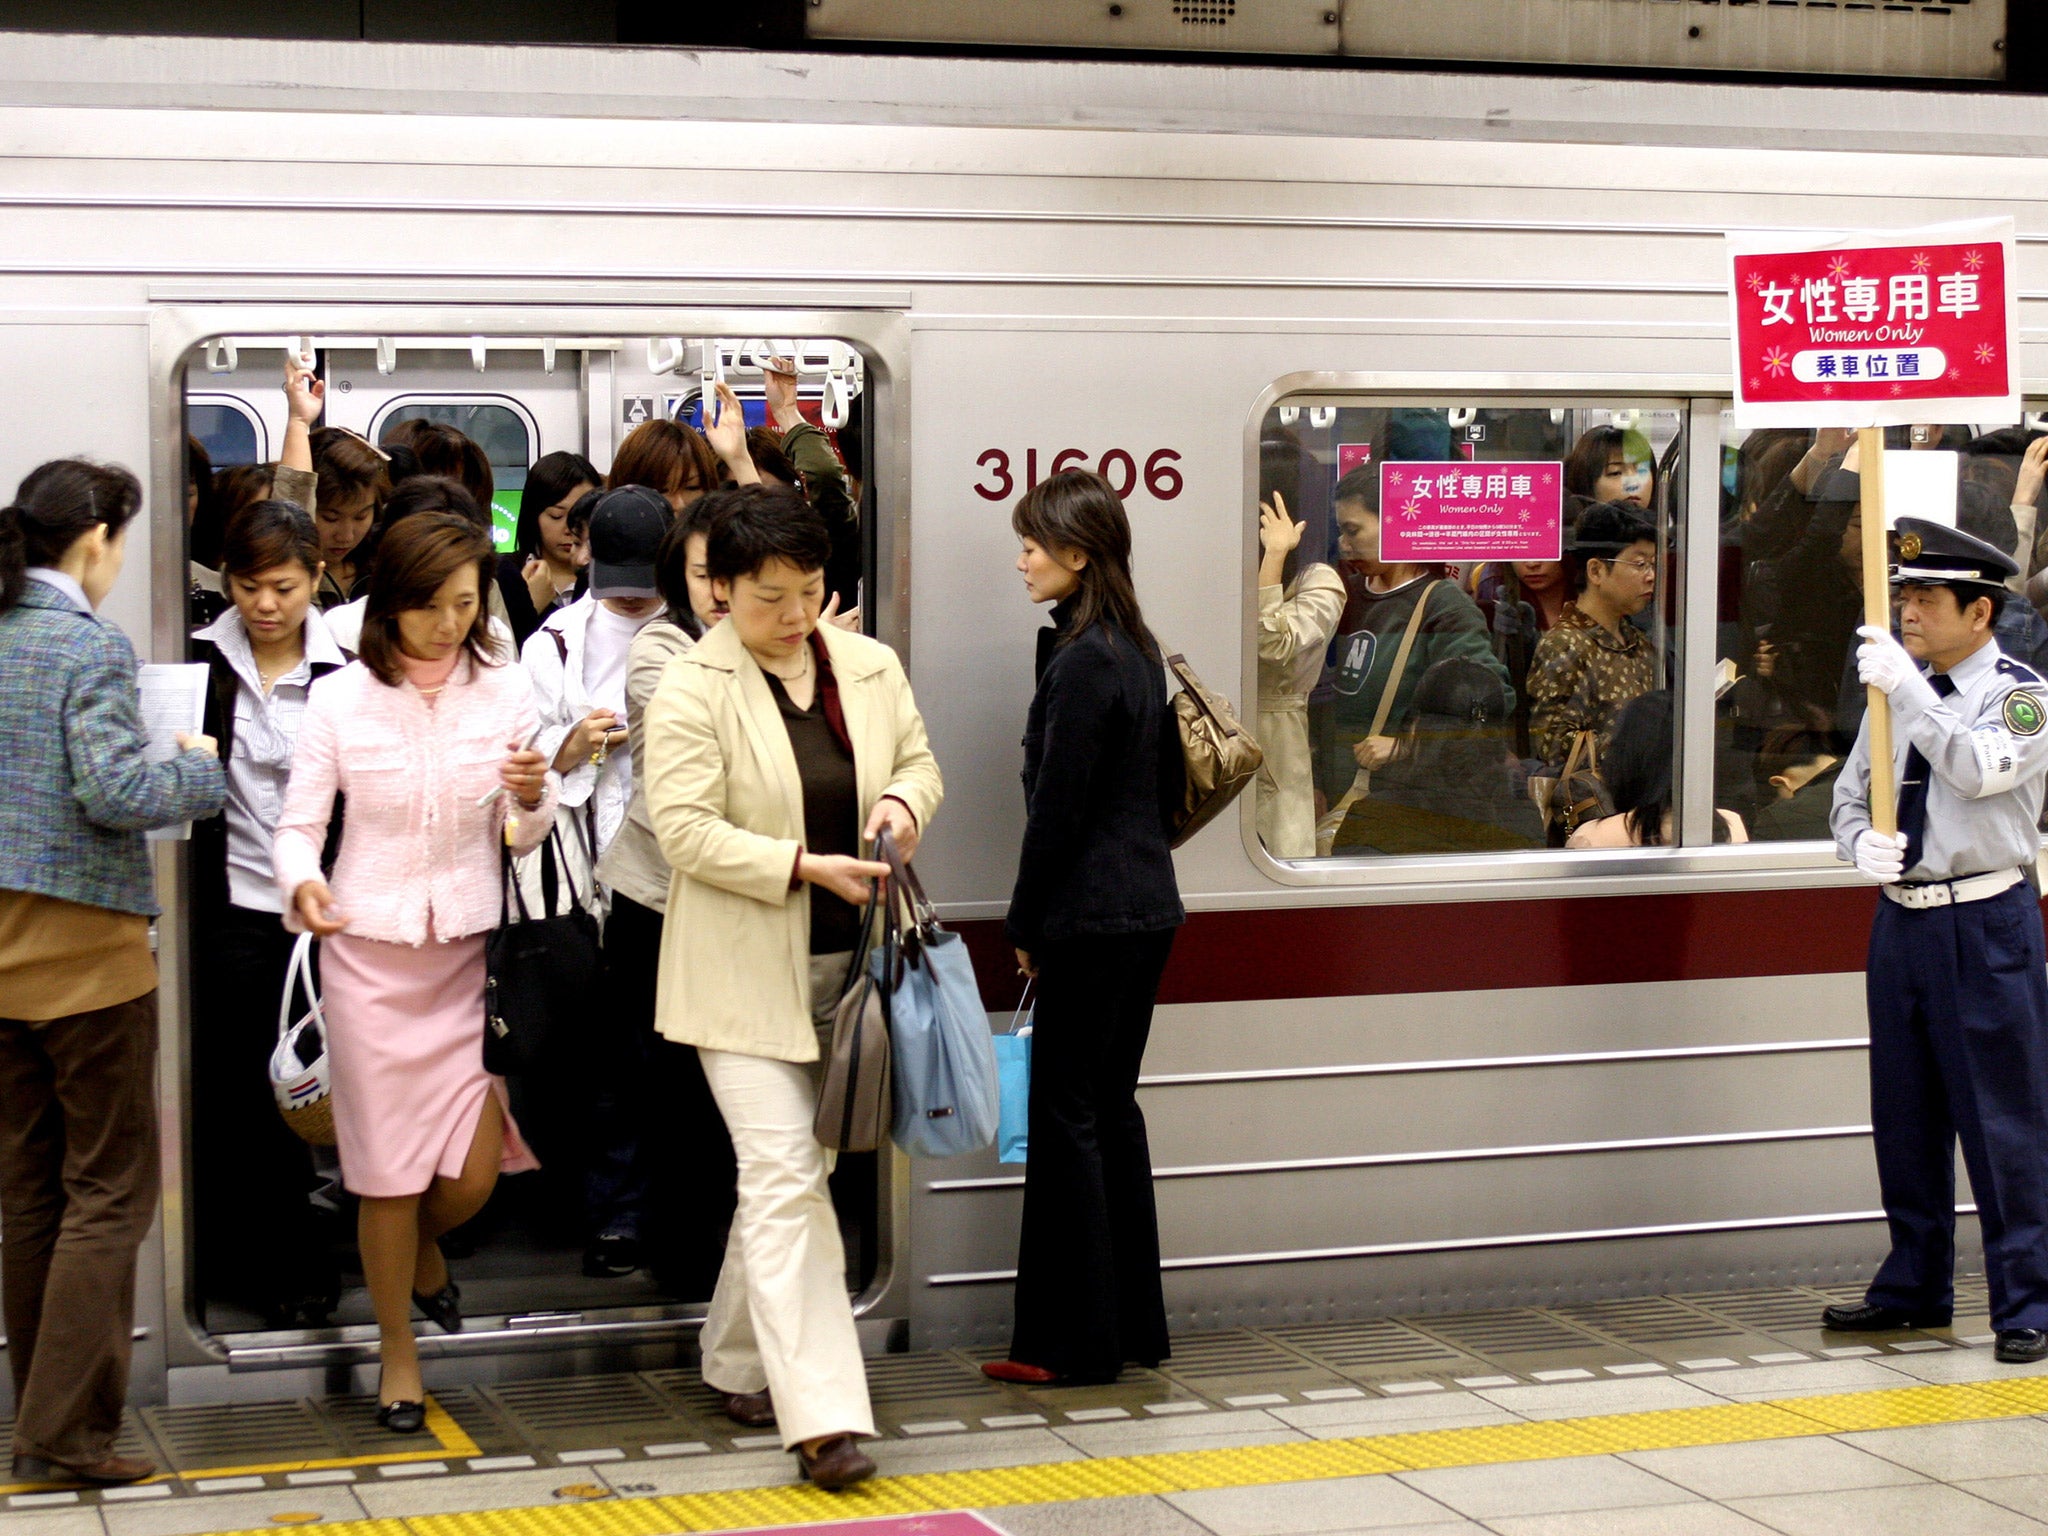 Female passengers come out from a 'women only' carriage at a metro station in Tokyo, Japan (Getty)